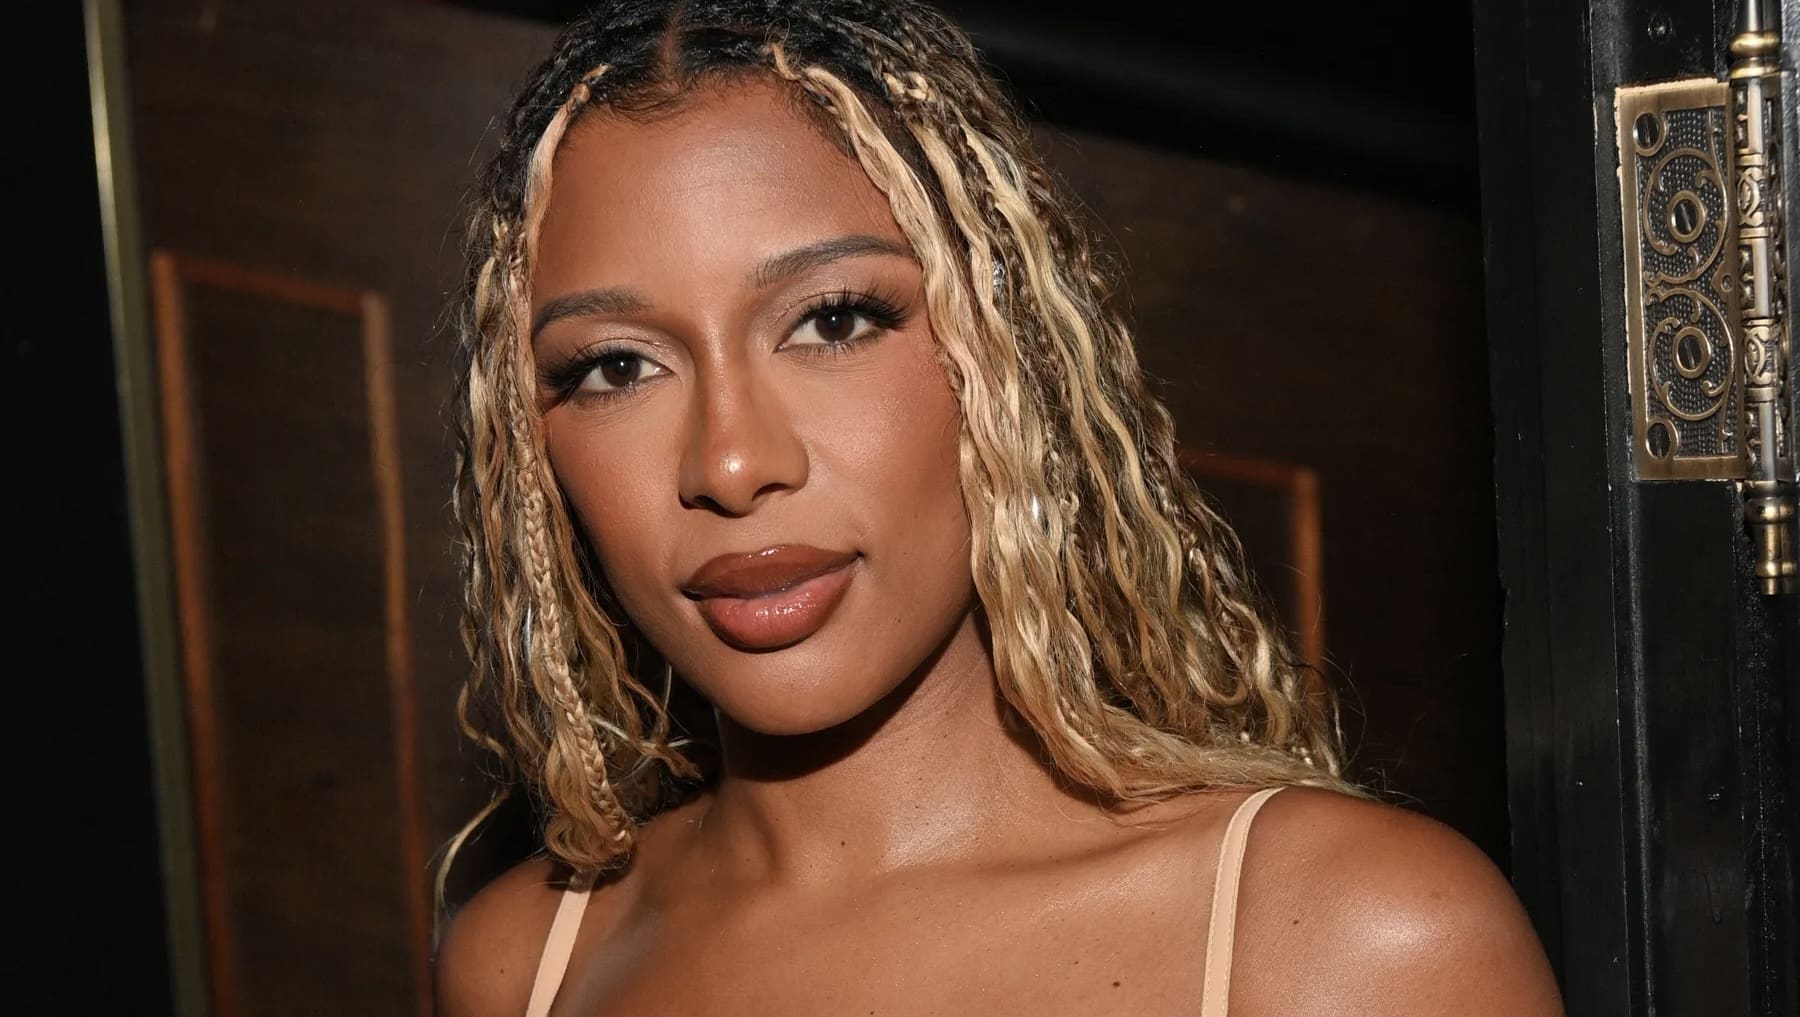 Victoria Monét Explained Why She Didn’t Perform At VMAs And Thanked Fans For Their ‘Advocation’ Of Her [Photos]